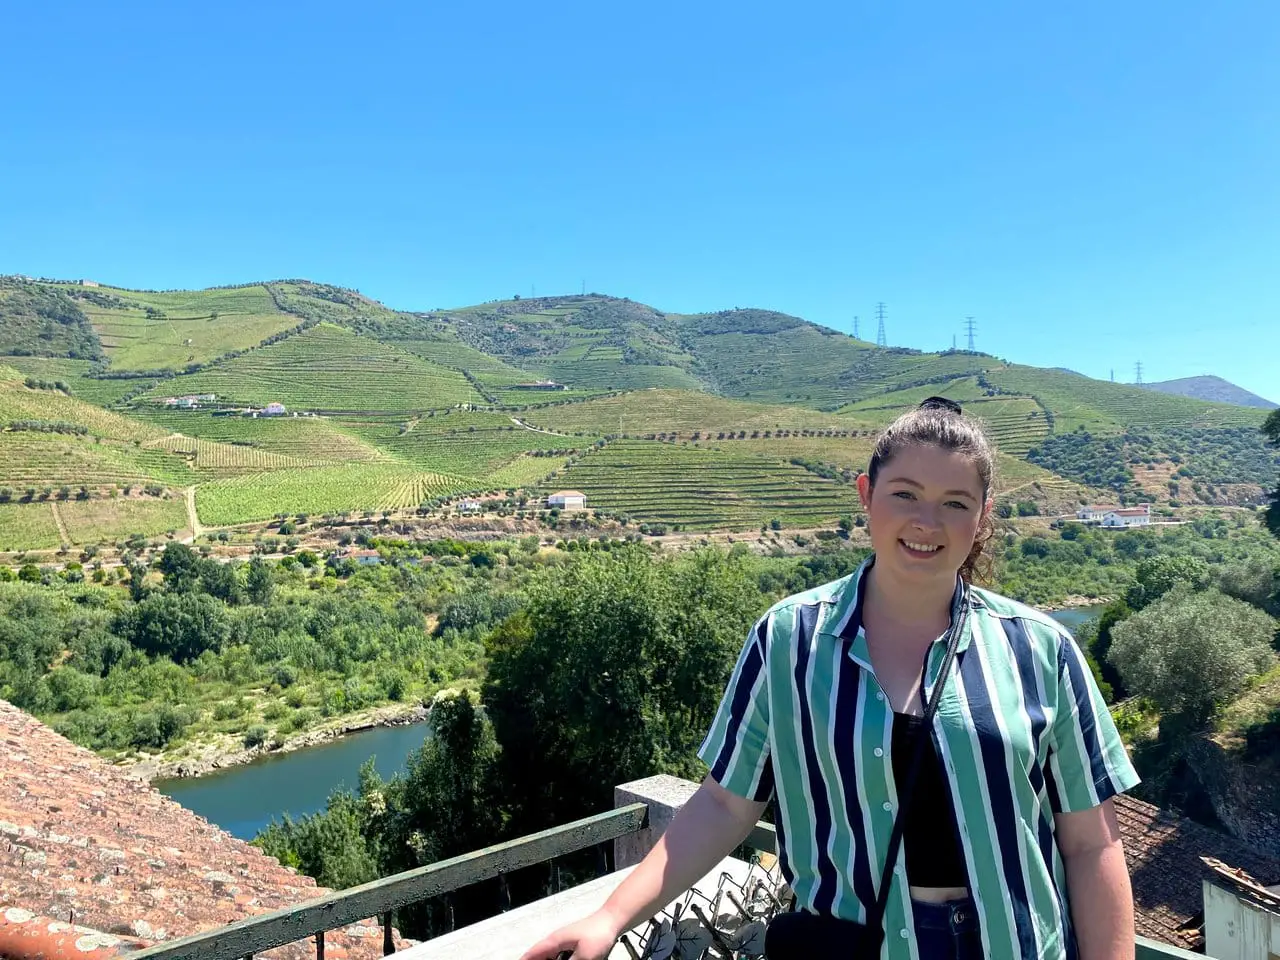 Exploring the Douro wine region in Portugal on a tour from Porto